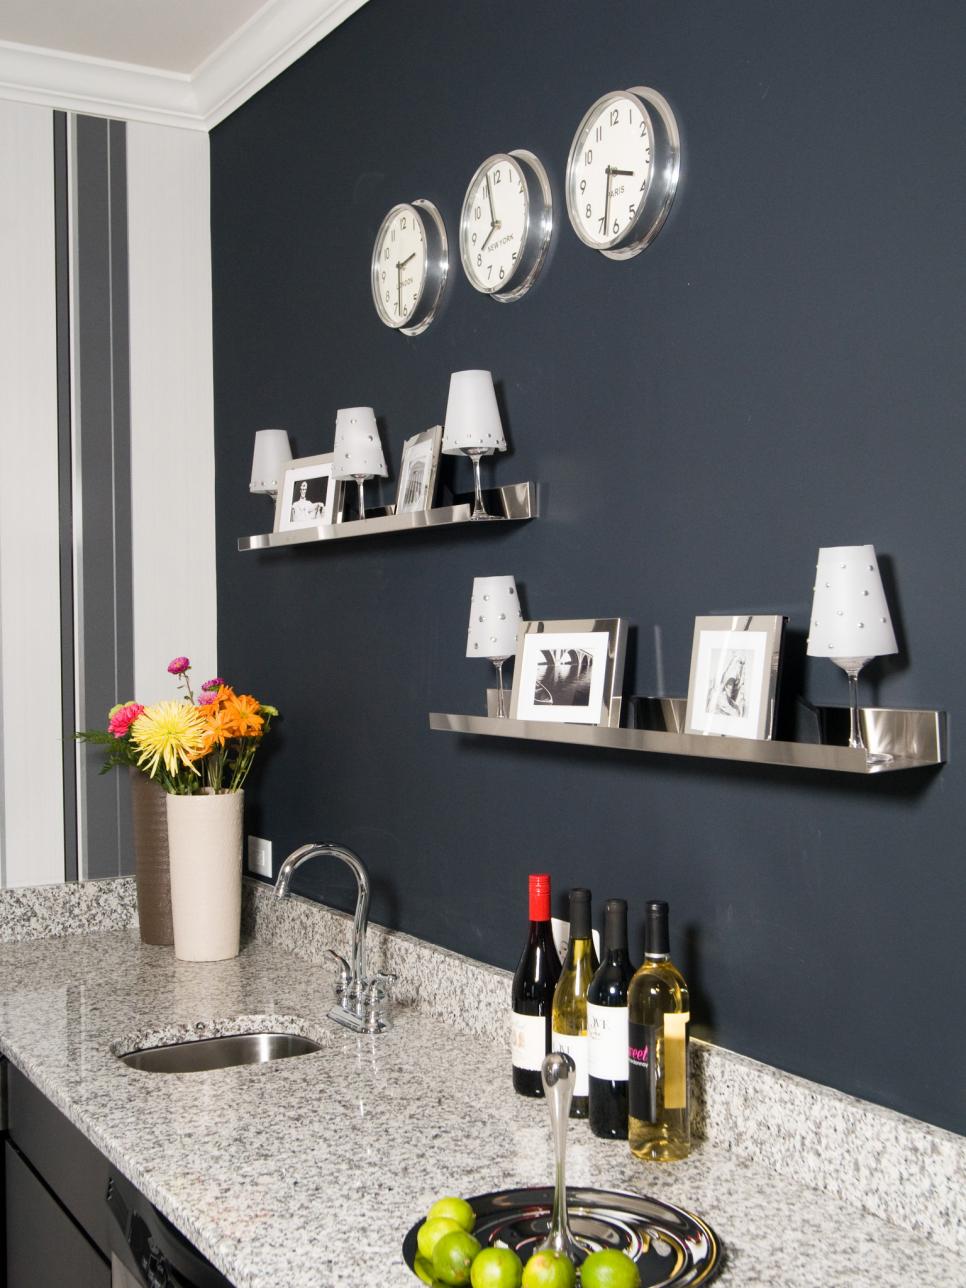 Dark Gray Wall With Stainless Steel Shelves and Wet Bar